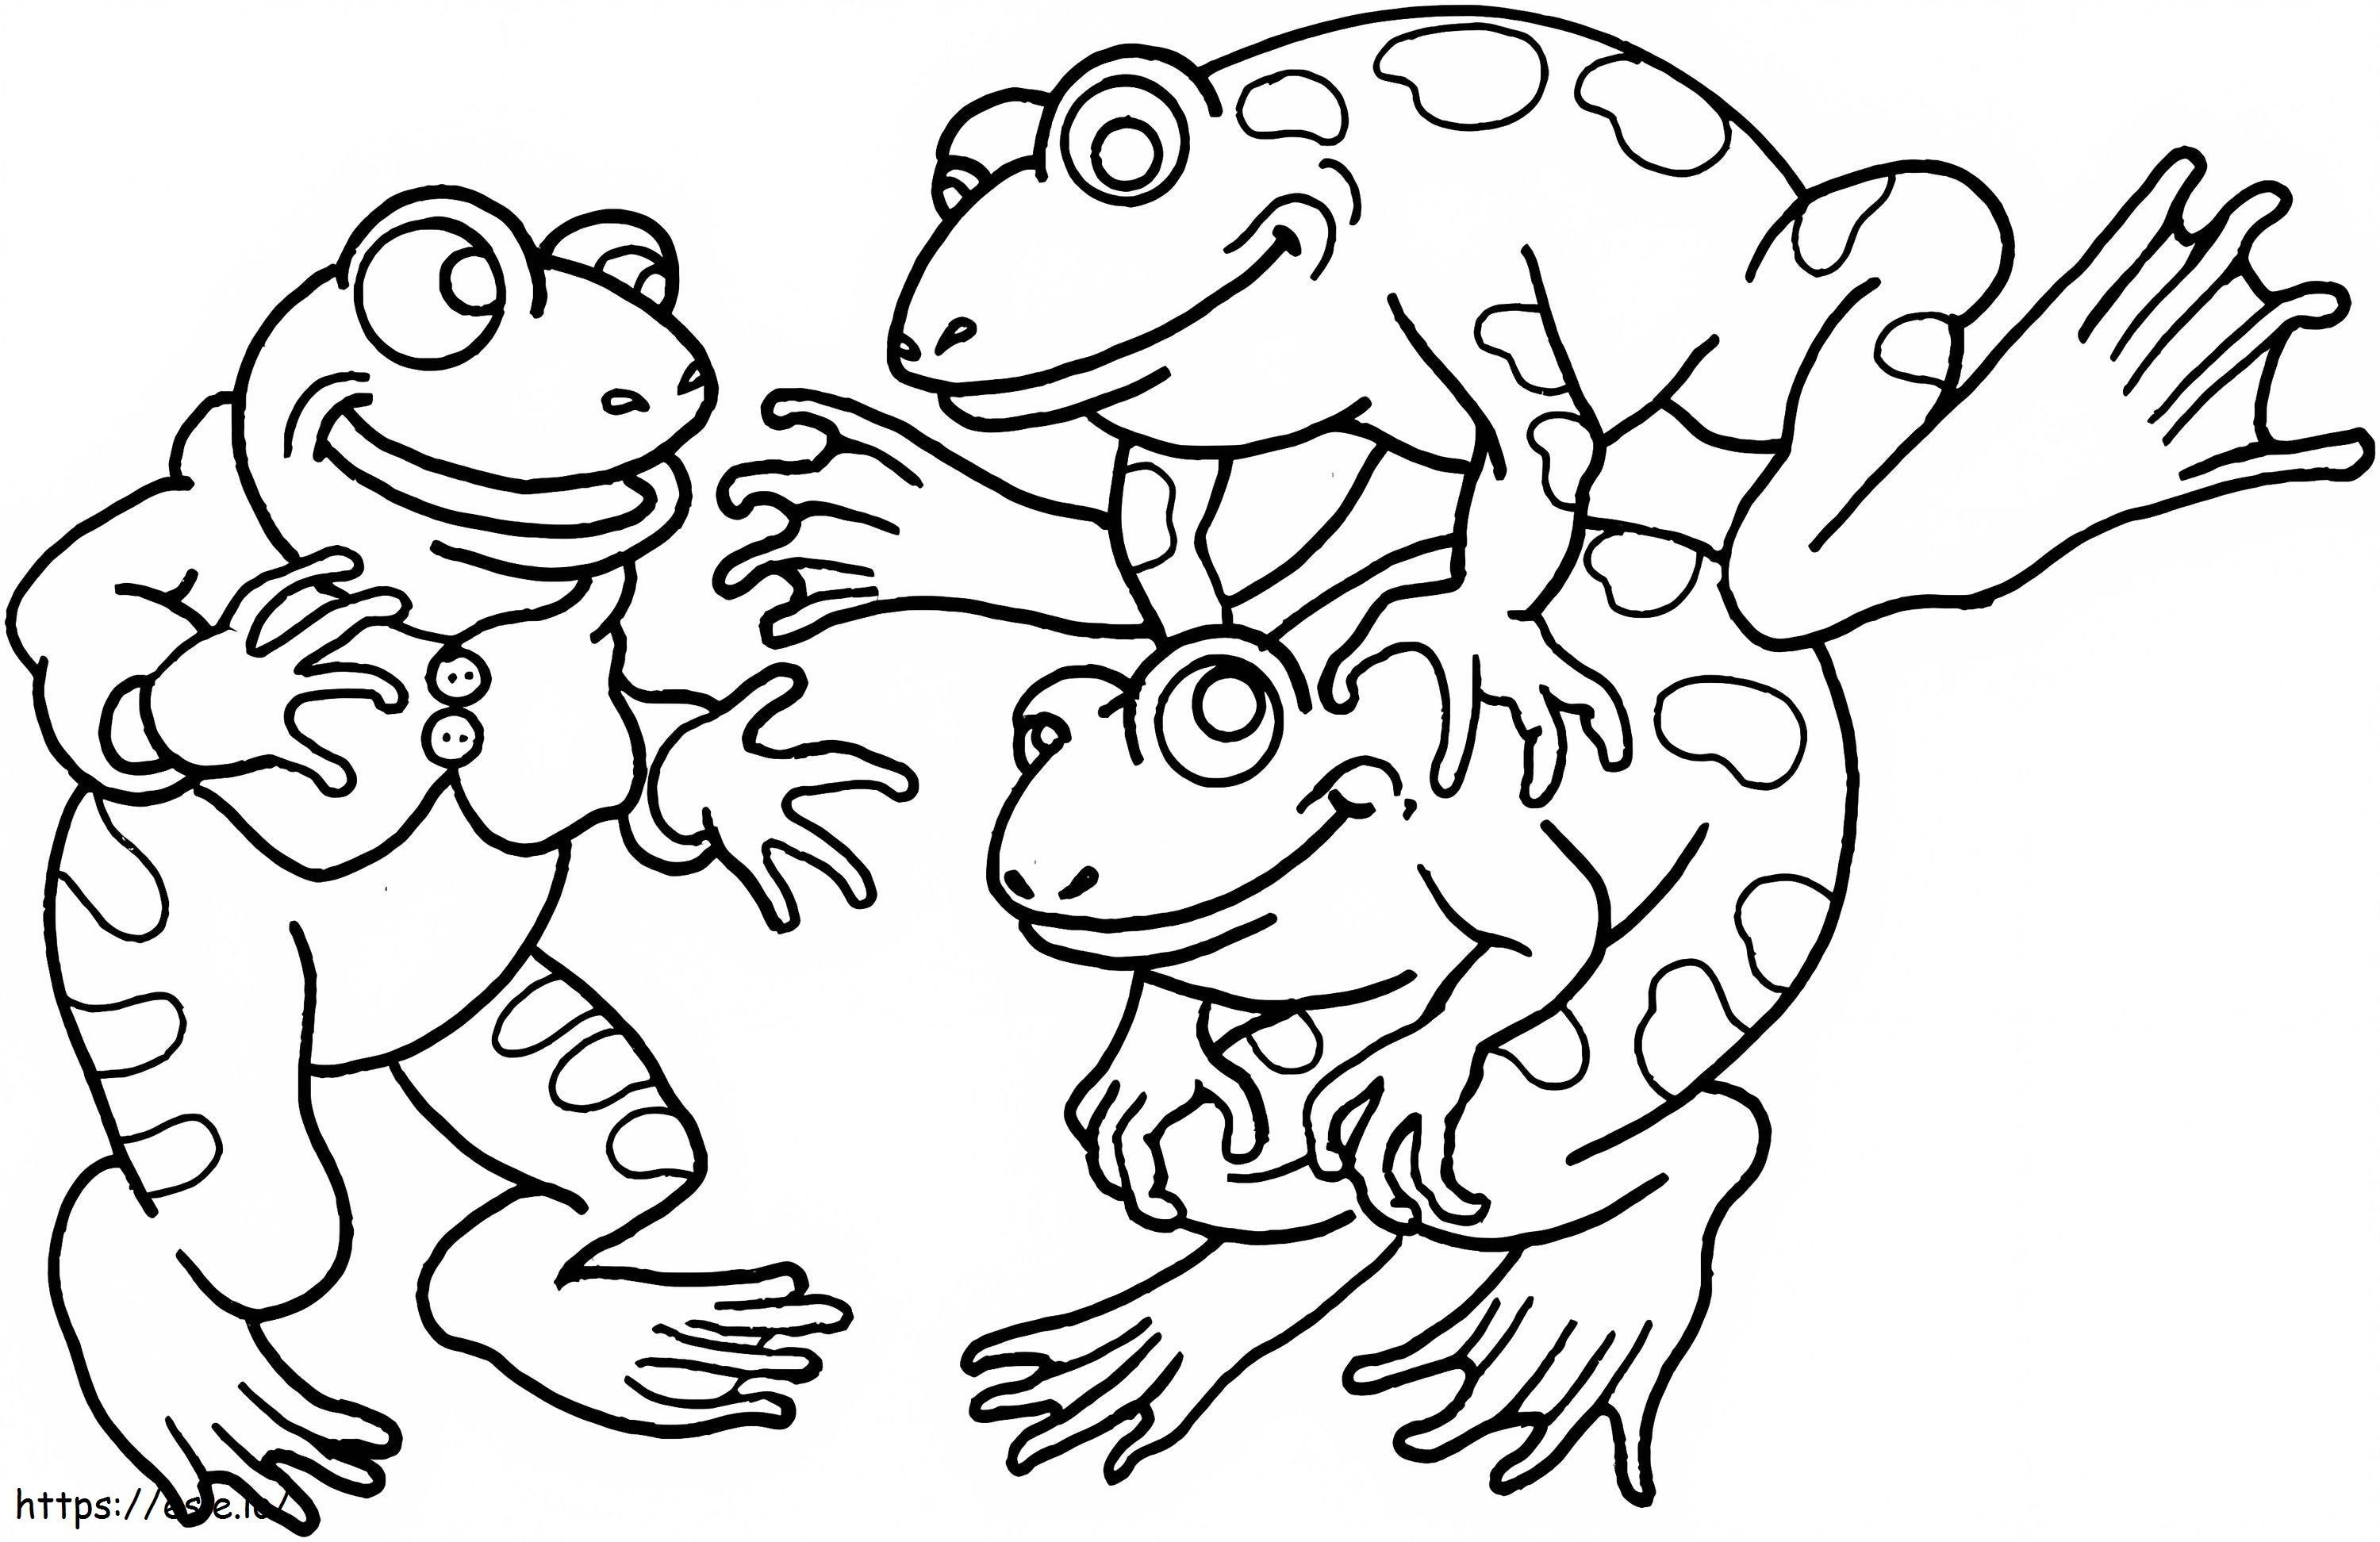 Fun Of Three Frogs coloring page